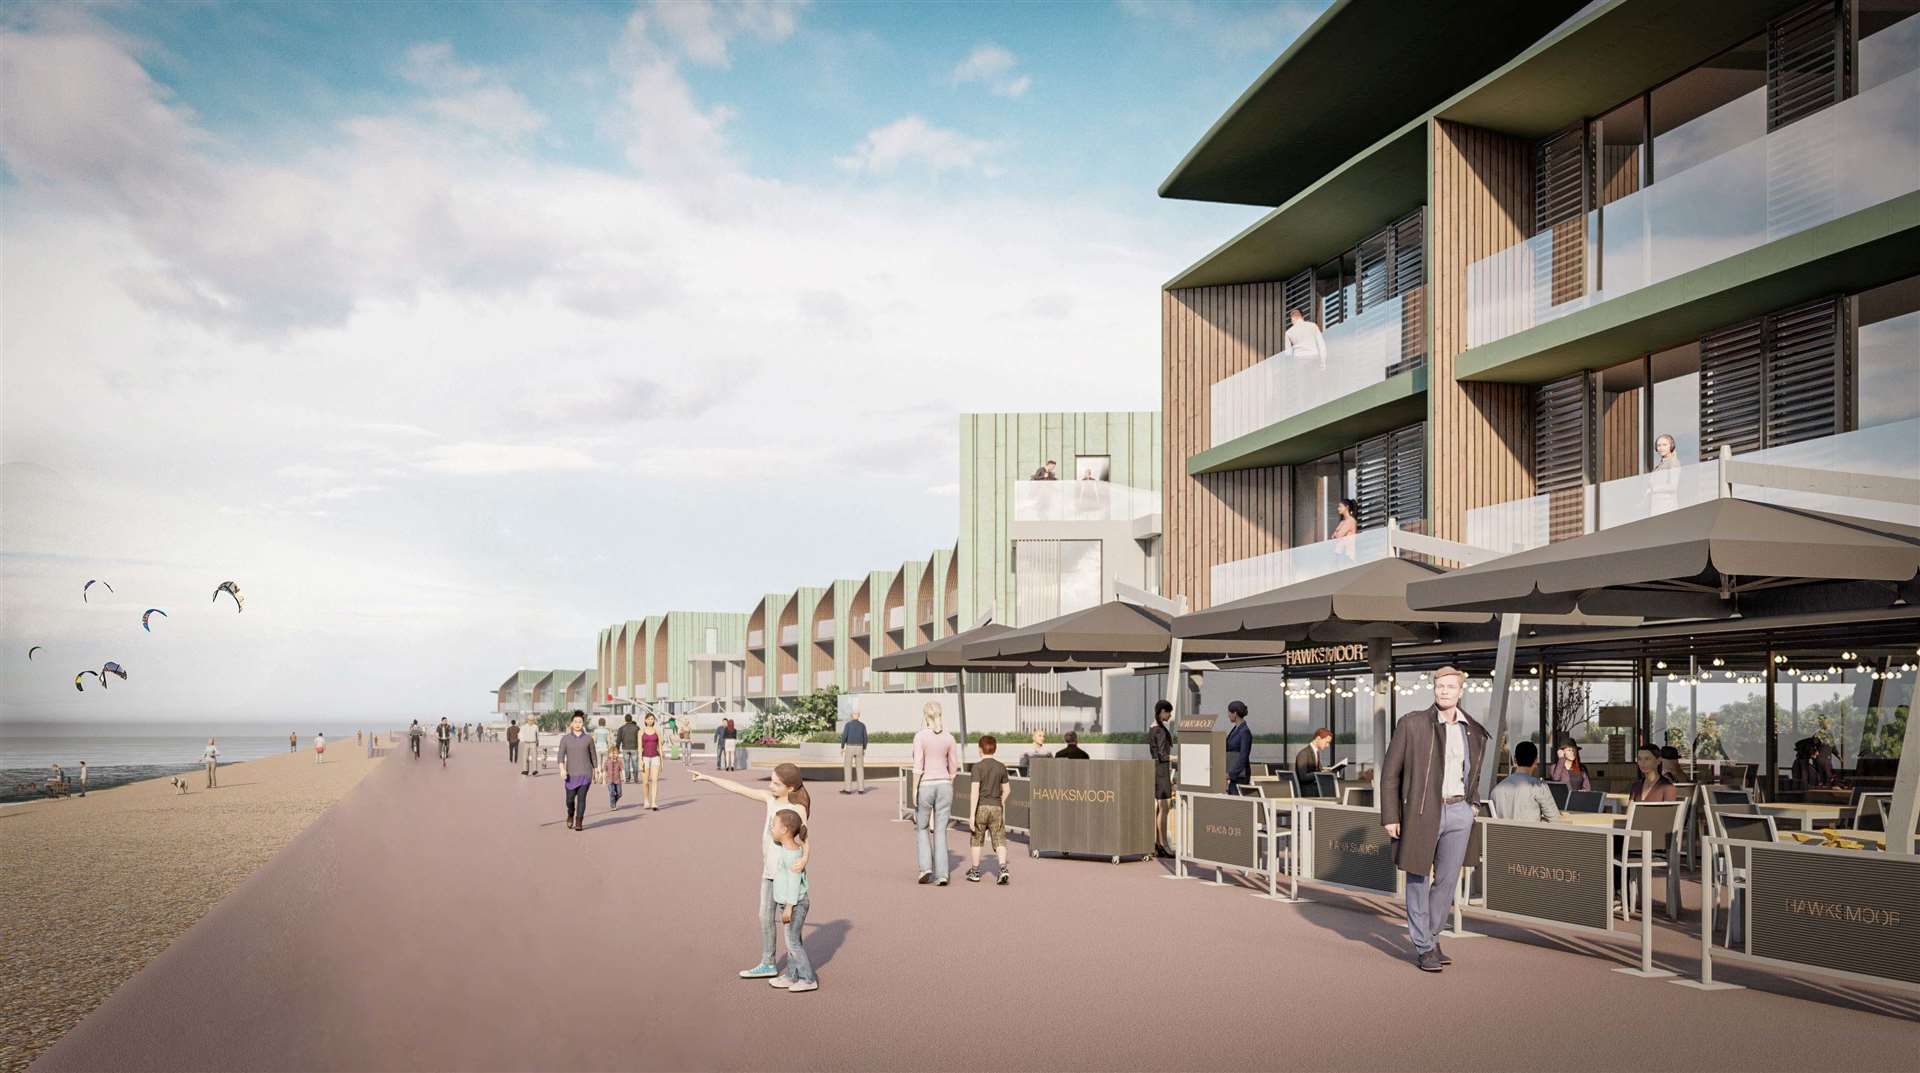 Plans for Princes Parade in Hythe are being drawn up by Hollaway Studio